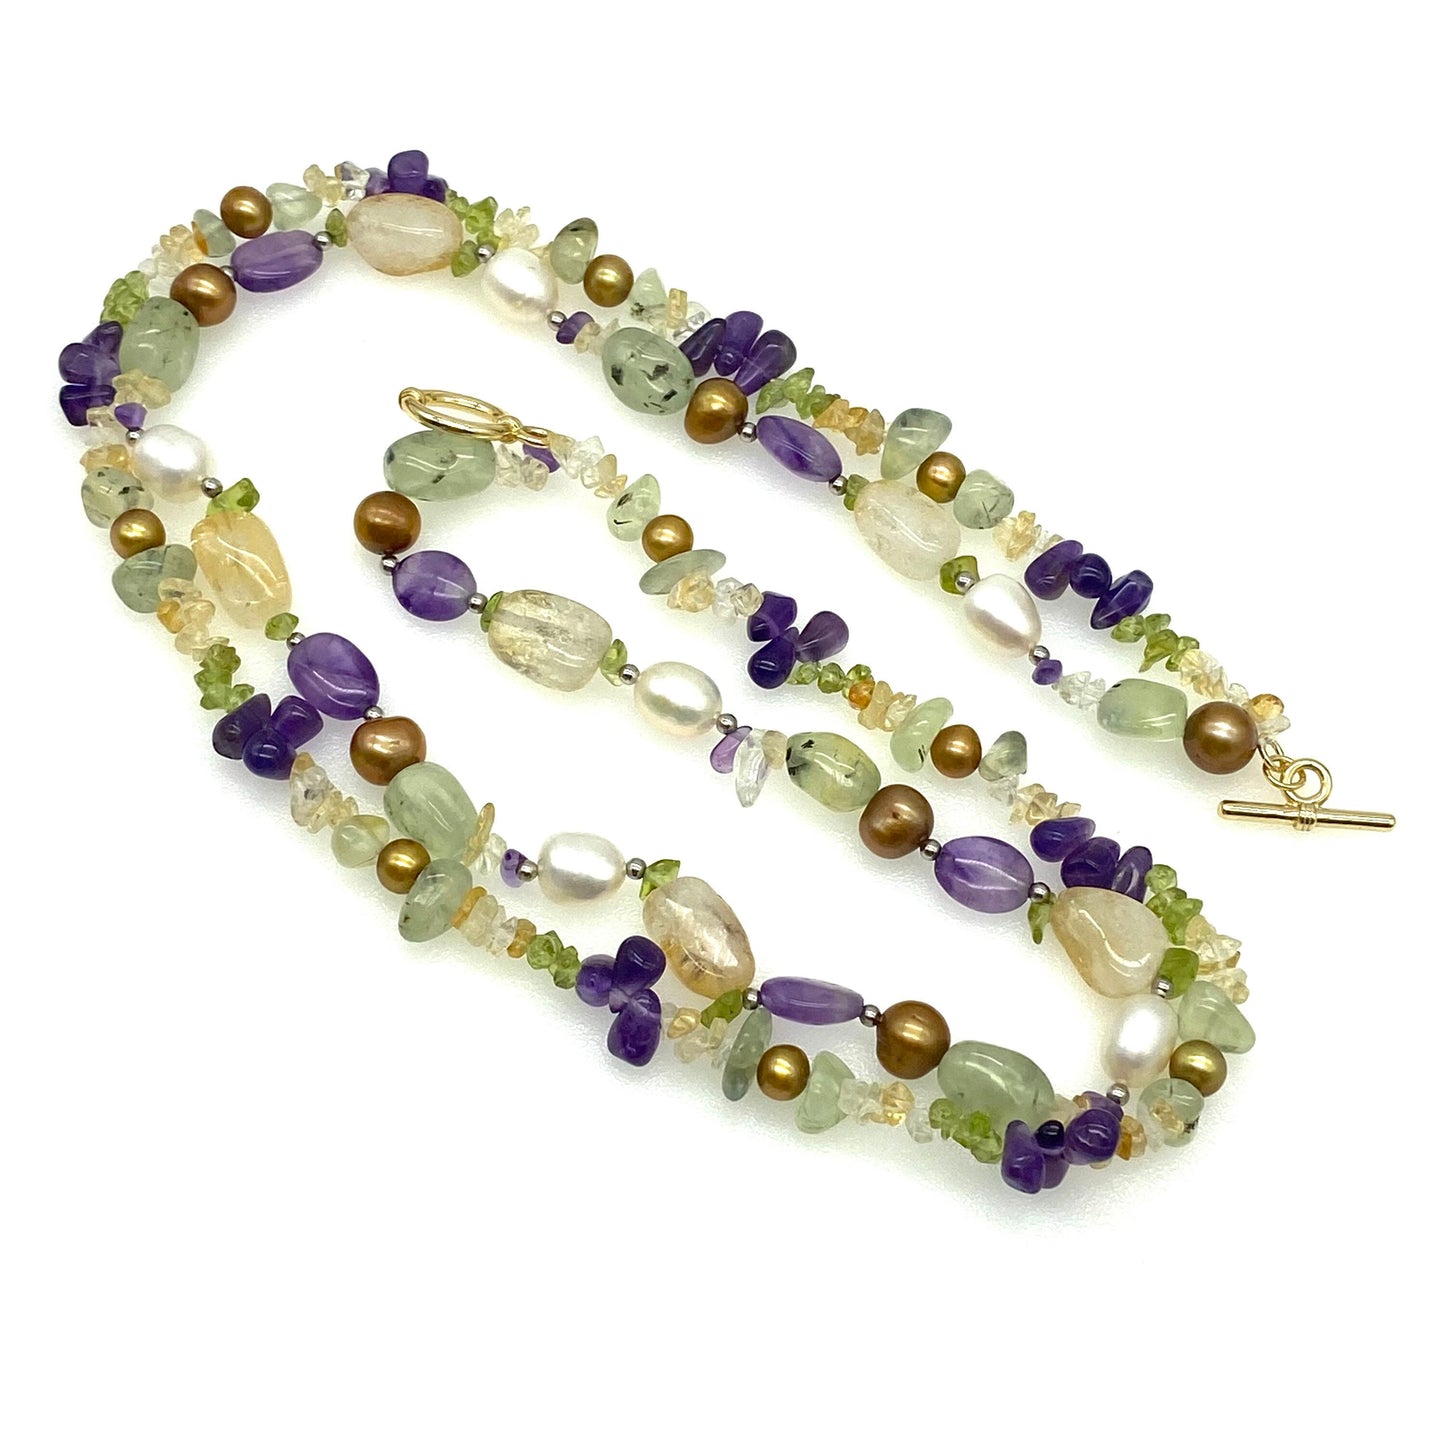 Vintage Tumbled Pebble Necklace Including Amethyst, Peridot, Rock Crystal and Fresh Water Cultured Pearls